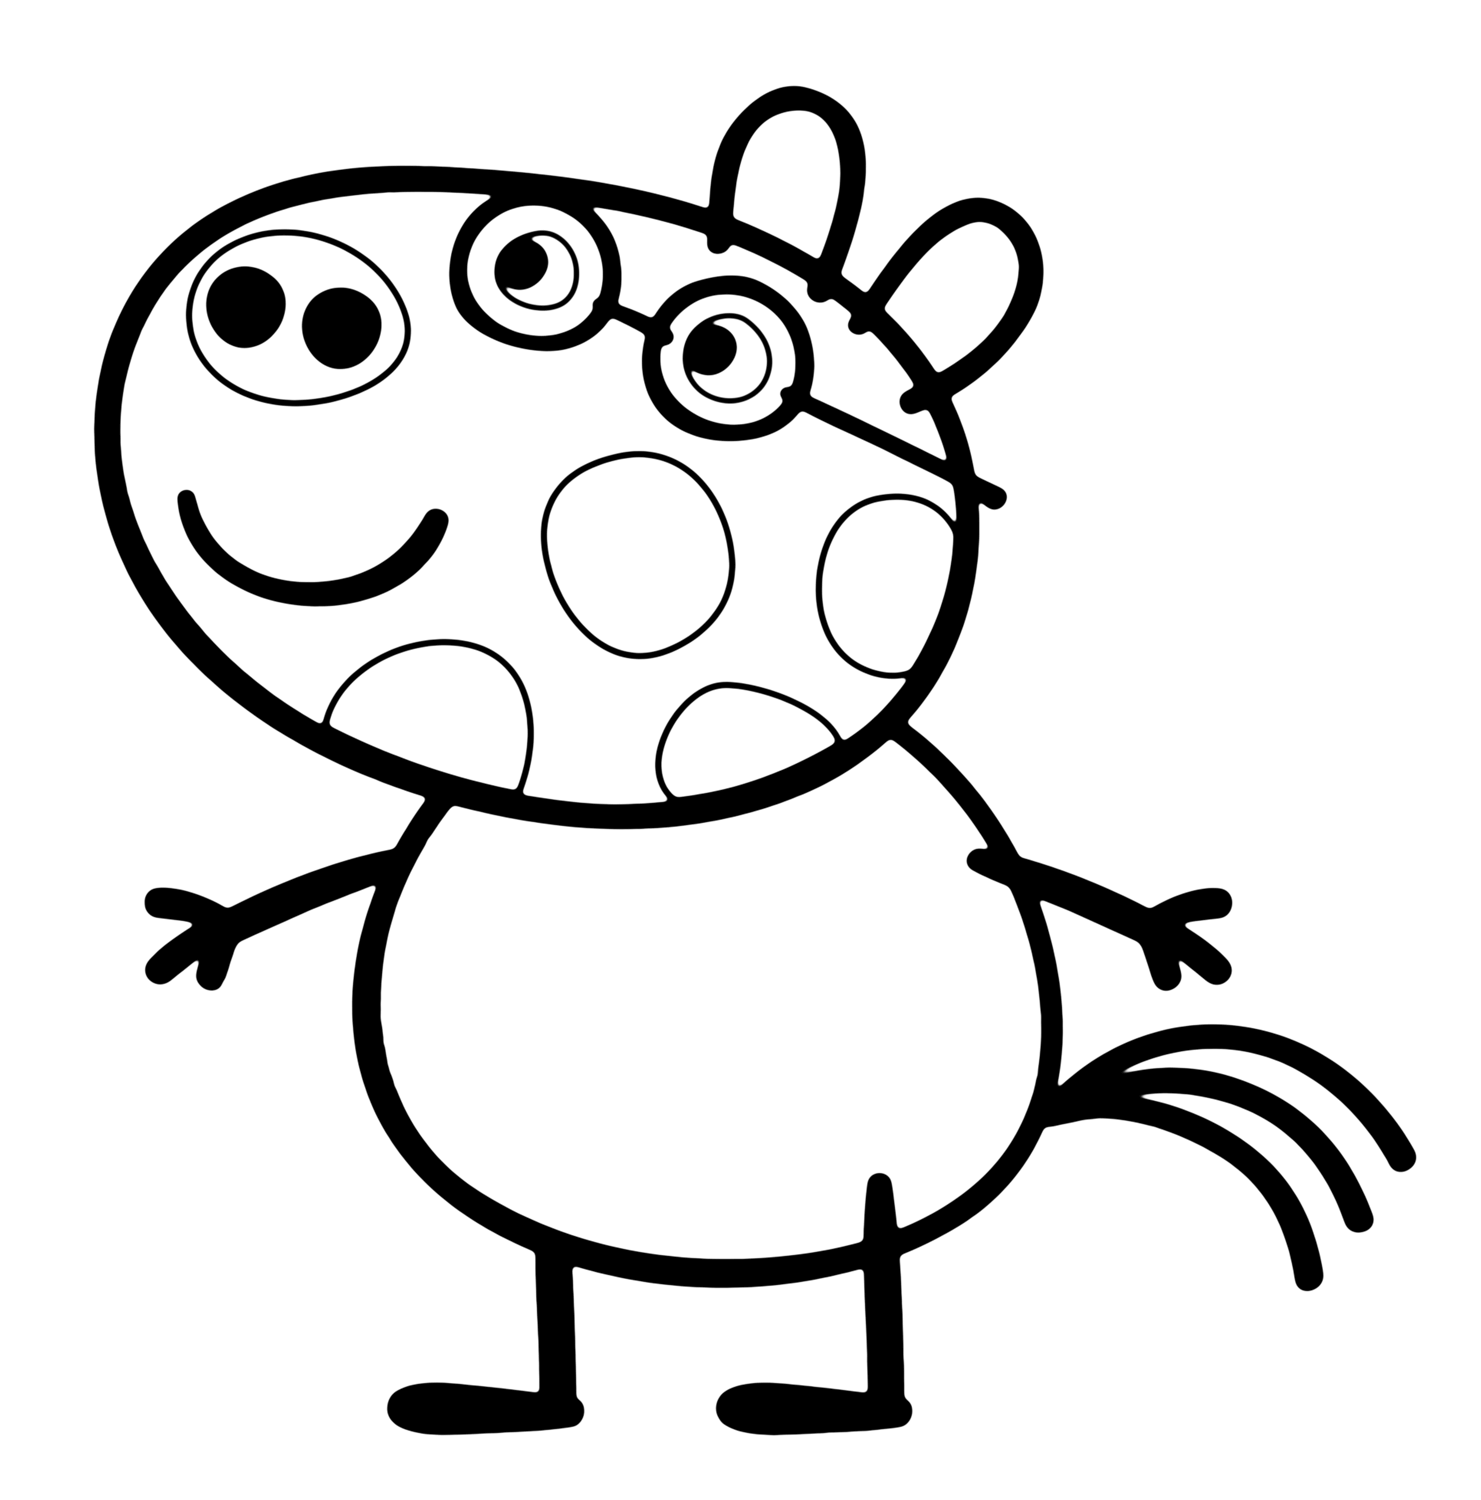 30 Printable Peppa Pig Coloring Pages You Won't Find Anywhere